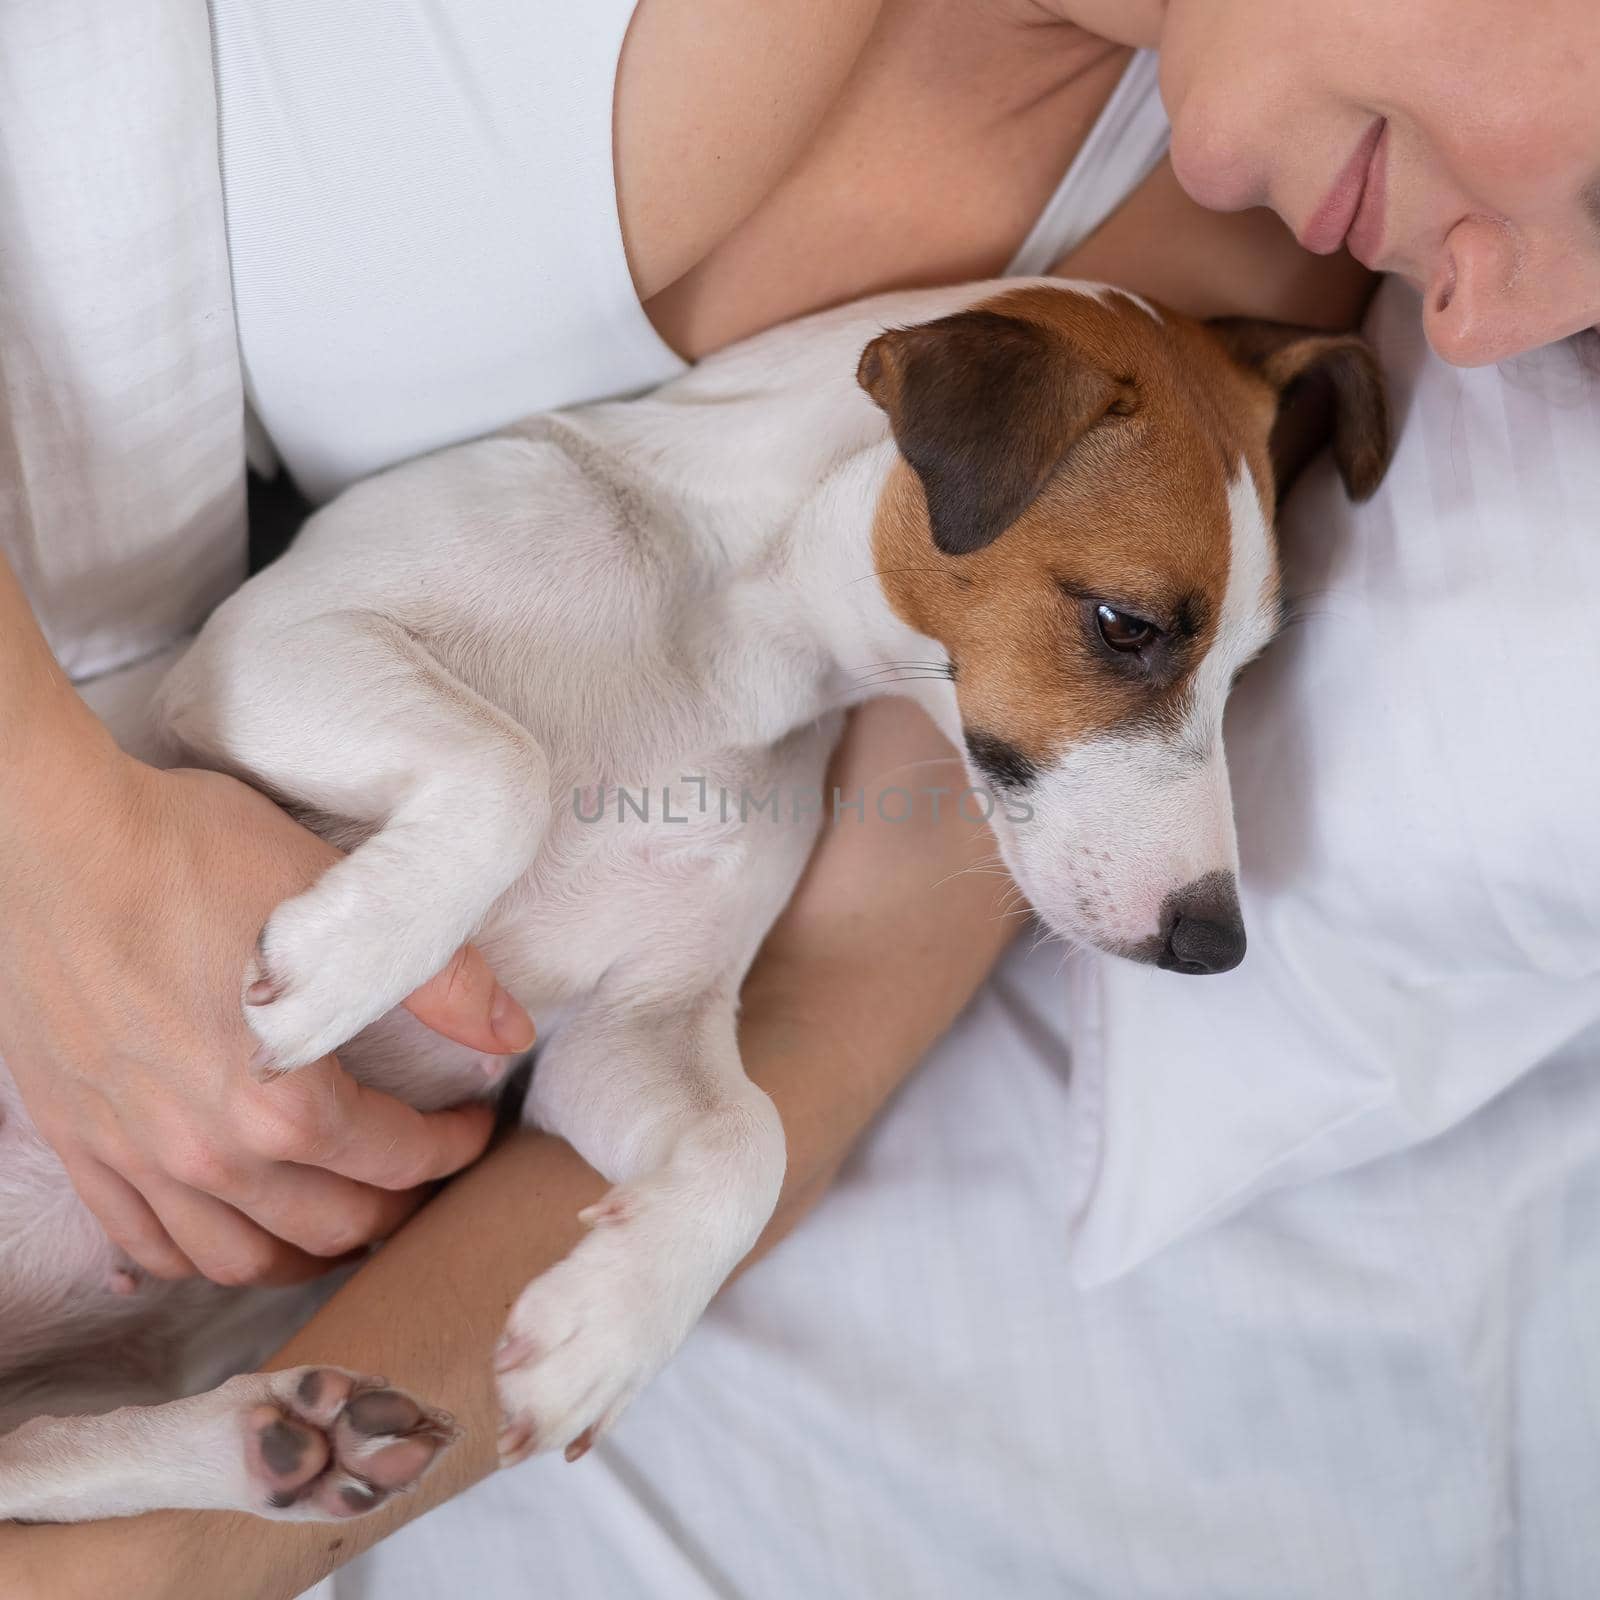 Jack Russell Terrier dog lies in an embrace with the owner in bed